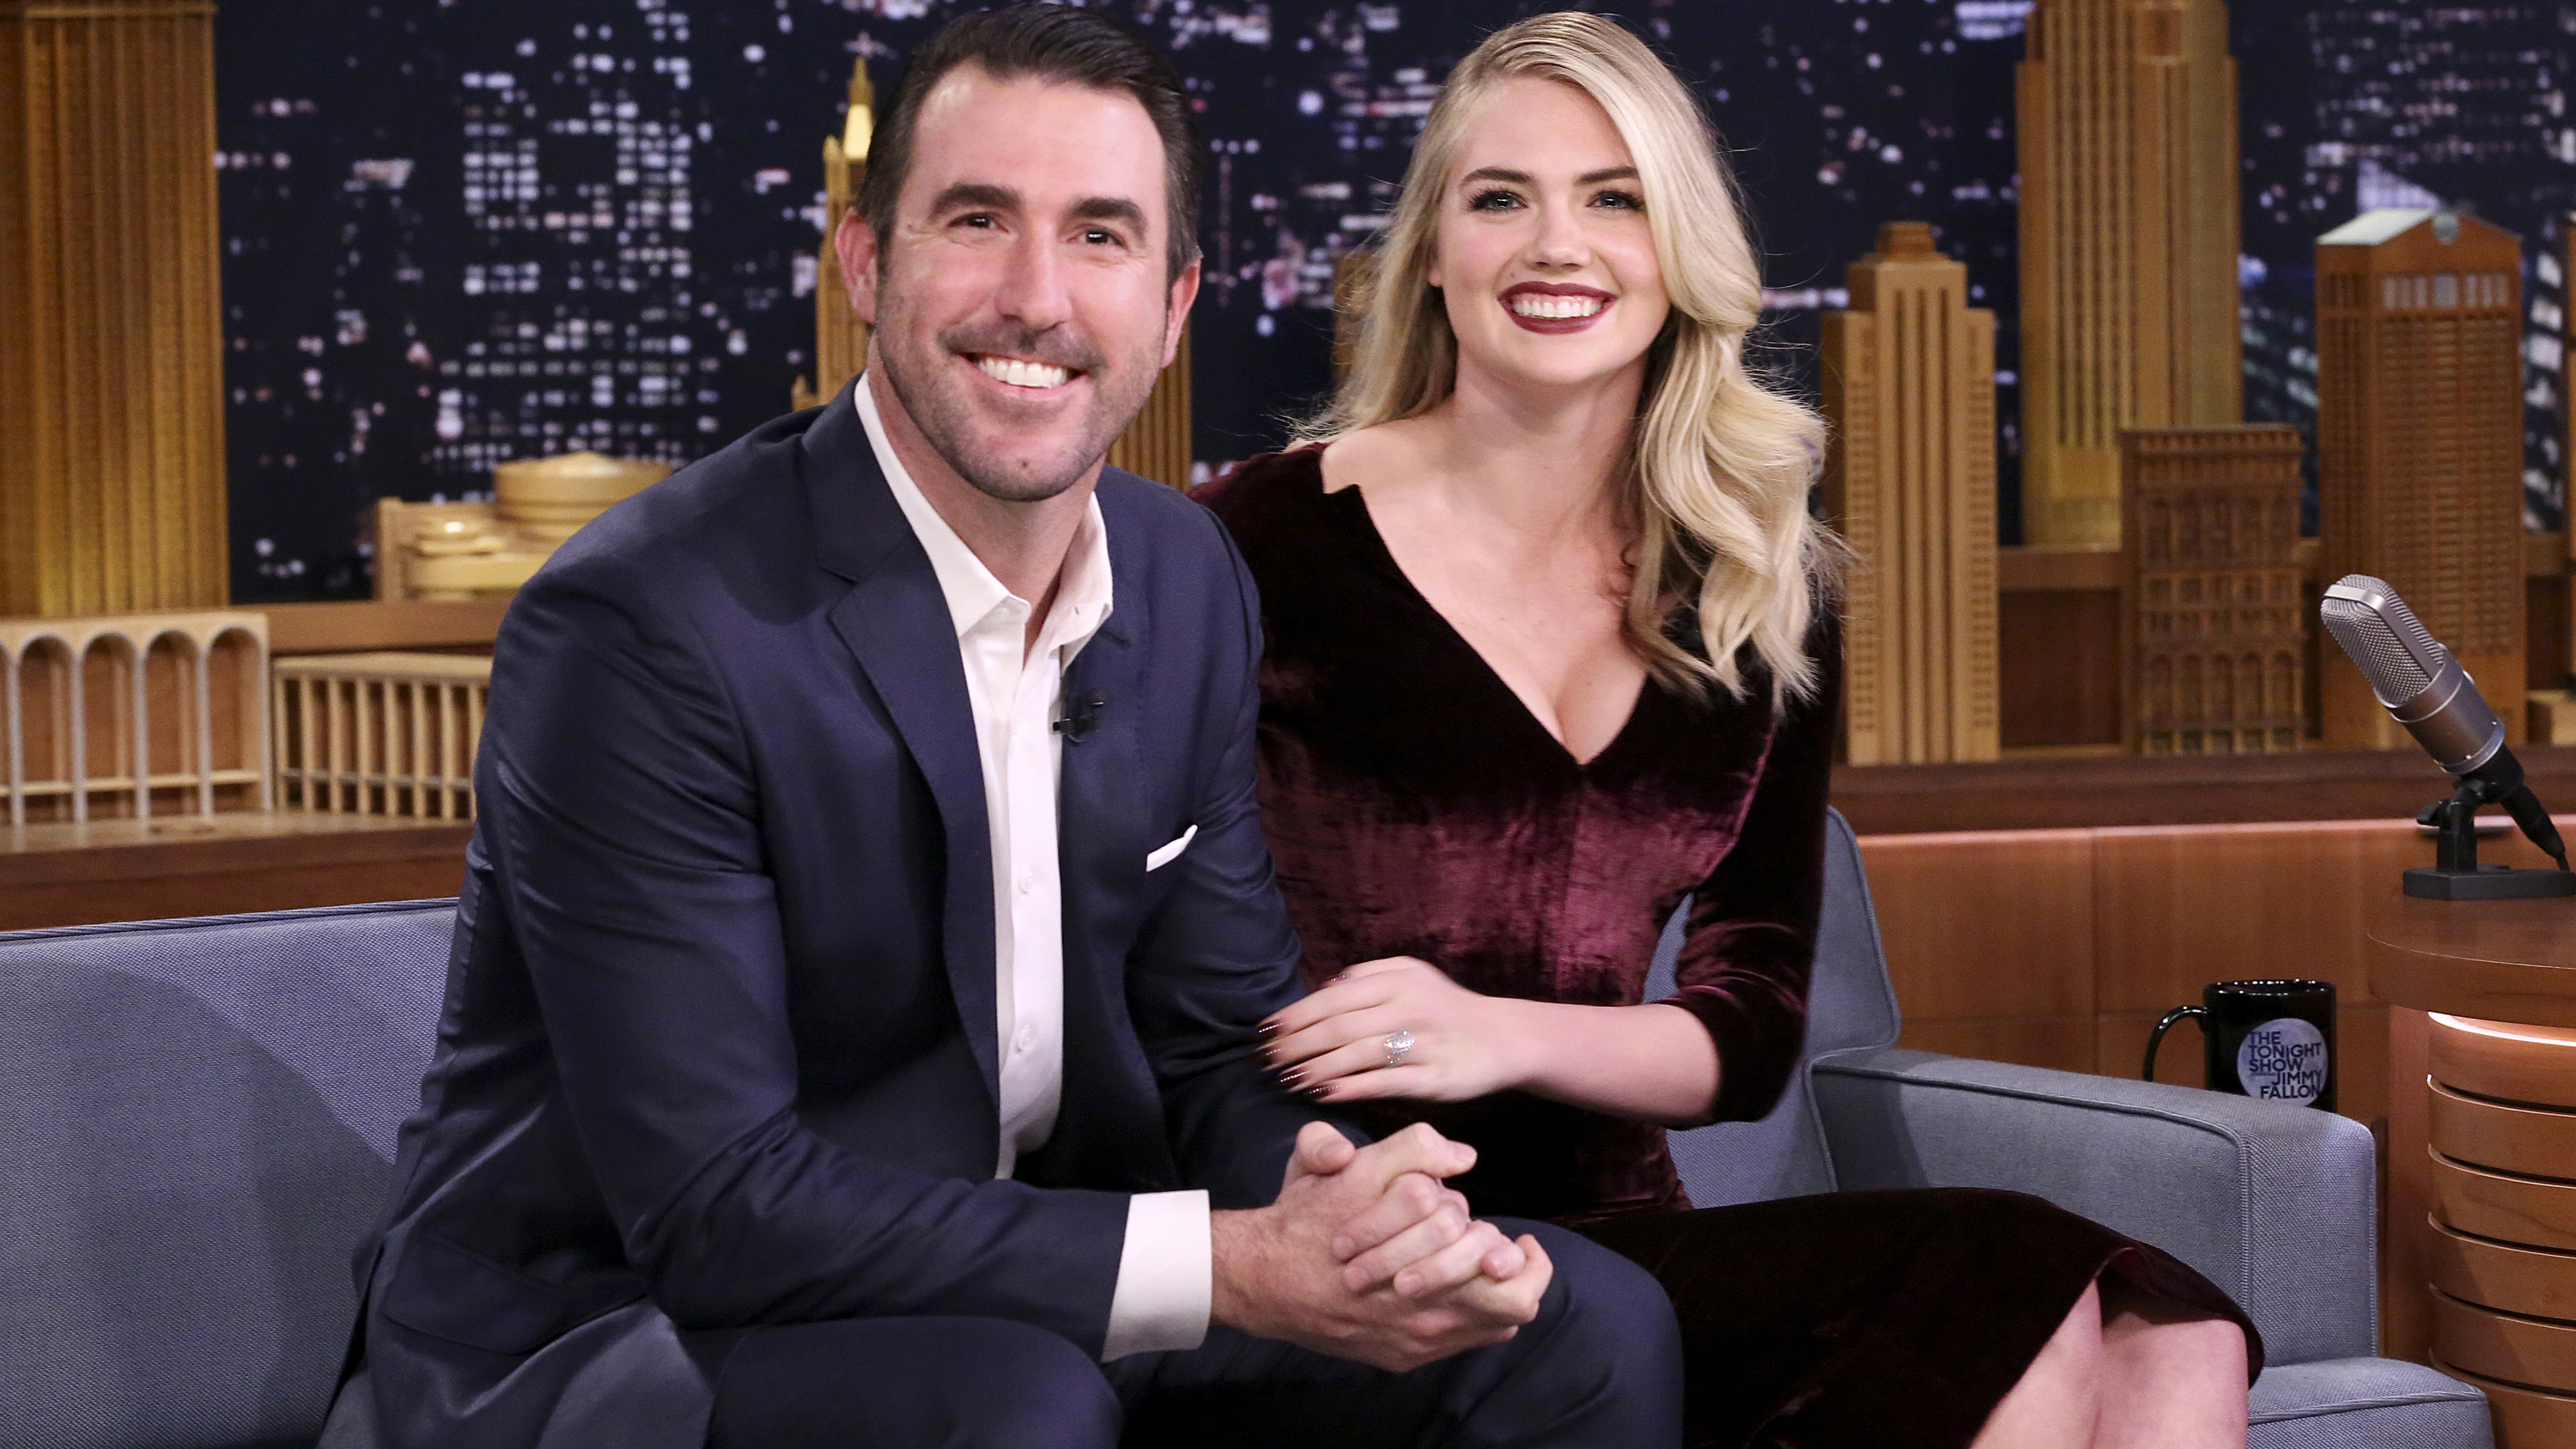 Model Kate Upton is expecting her first child with Justin Verlander